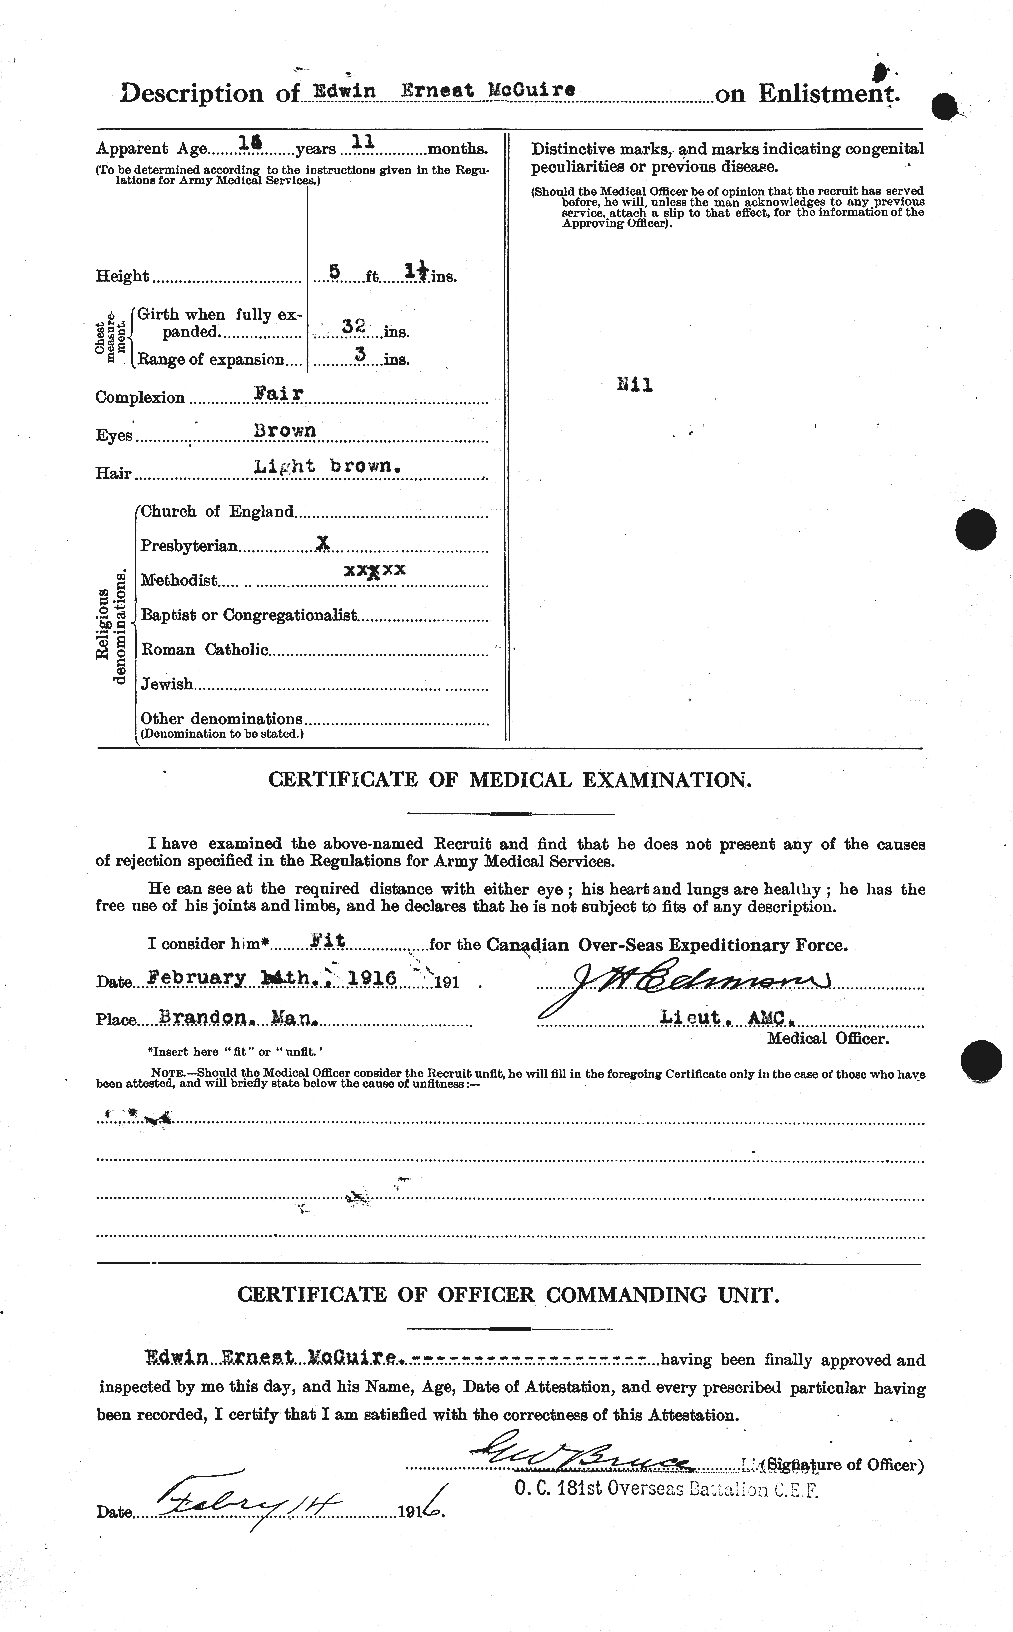 Personnel Records of the First World War - CEF 523307b